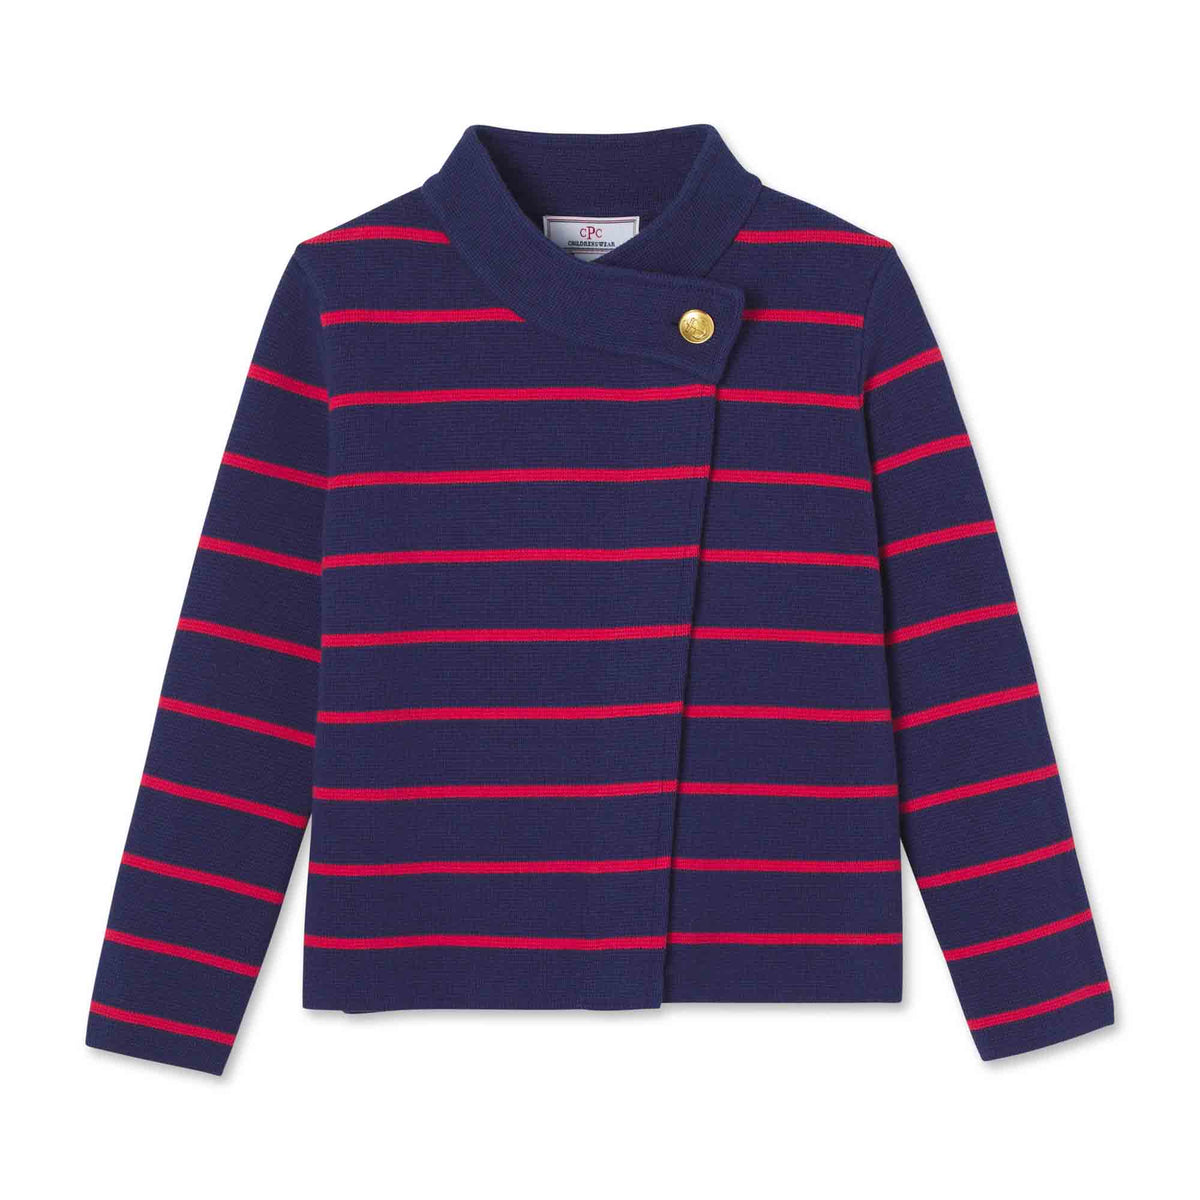 Classic and Preppy Emery Striped Button Sweater, Blue Ribbon with Mineral Red Stripes-Sweaters-Blue Ribbon with Mineral Red Stripes-5Y-CPC - Classic Prep Childrenswear